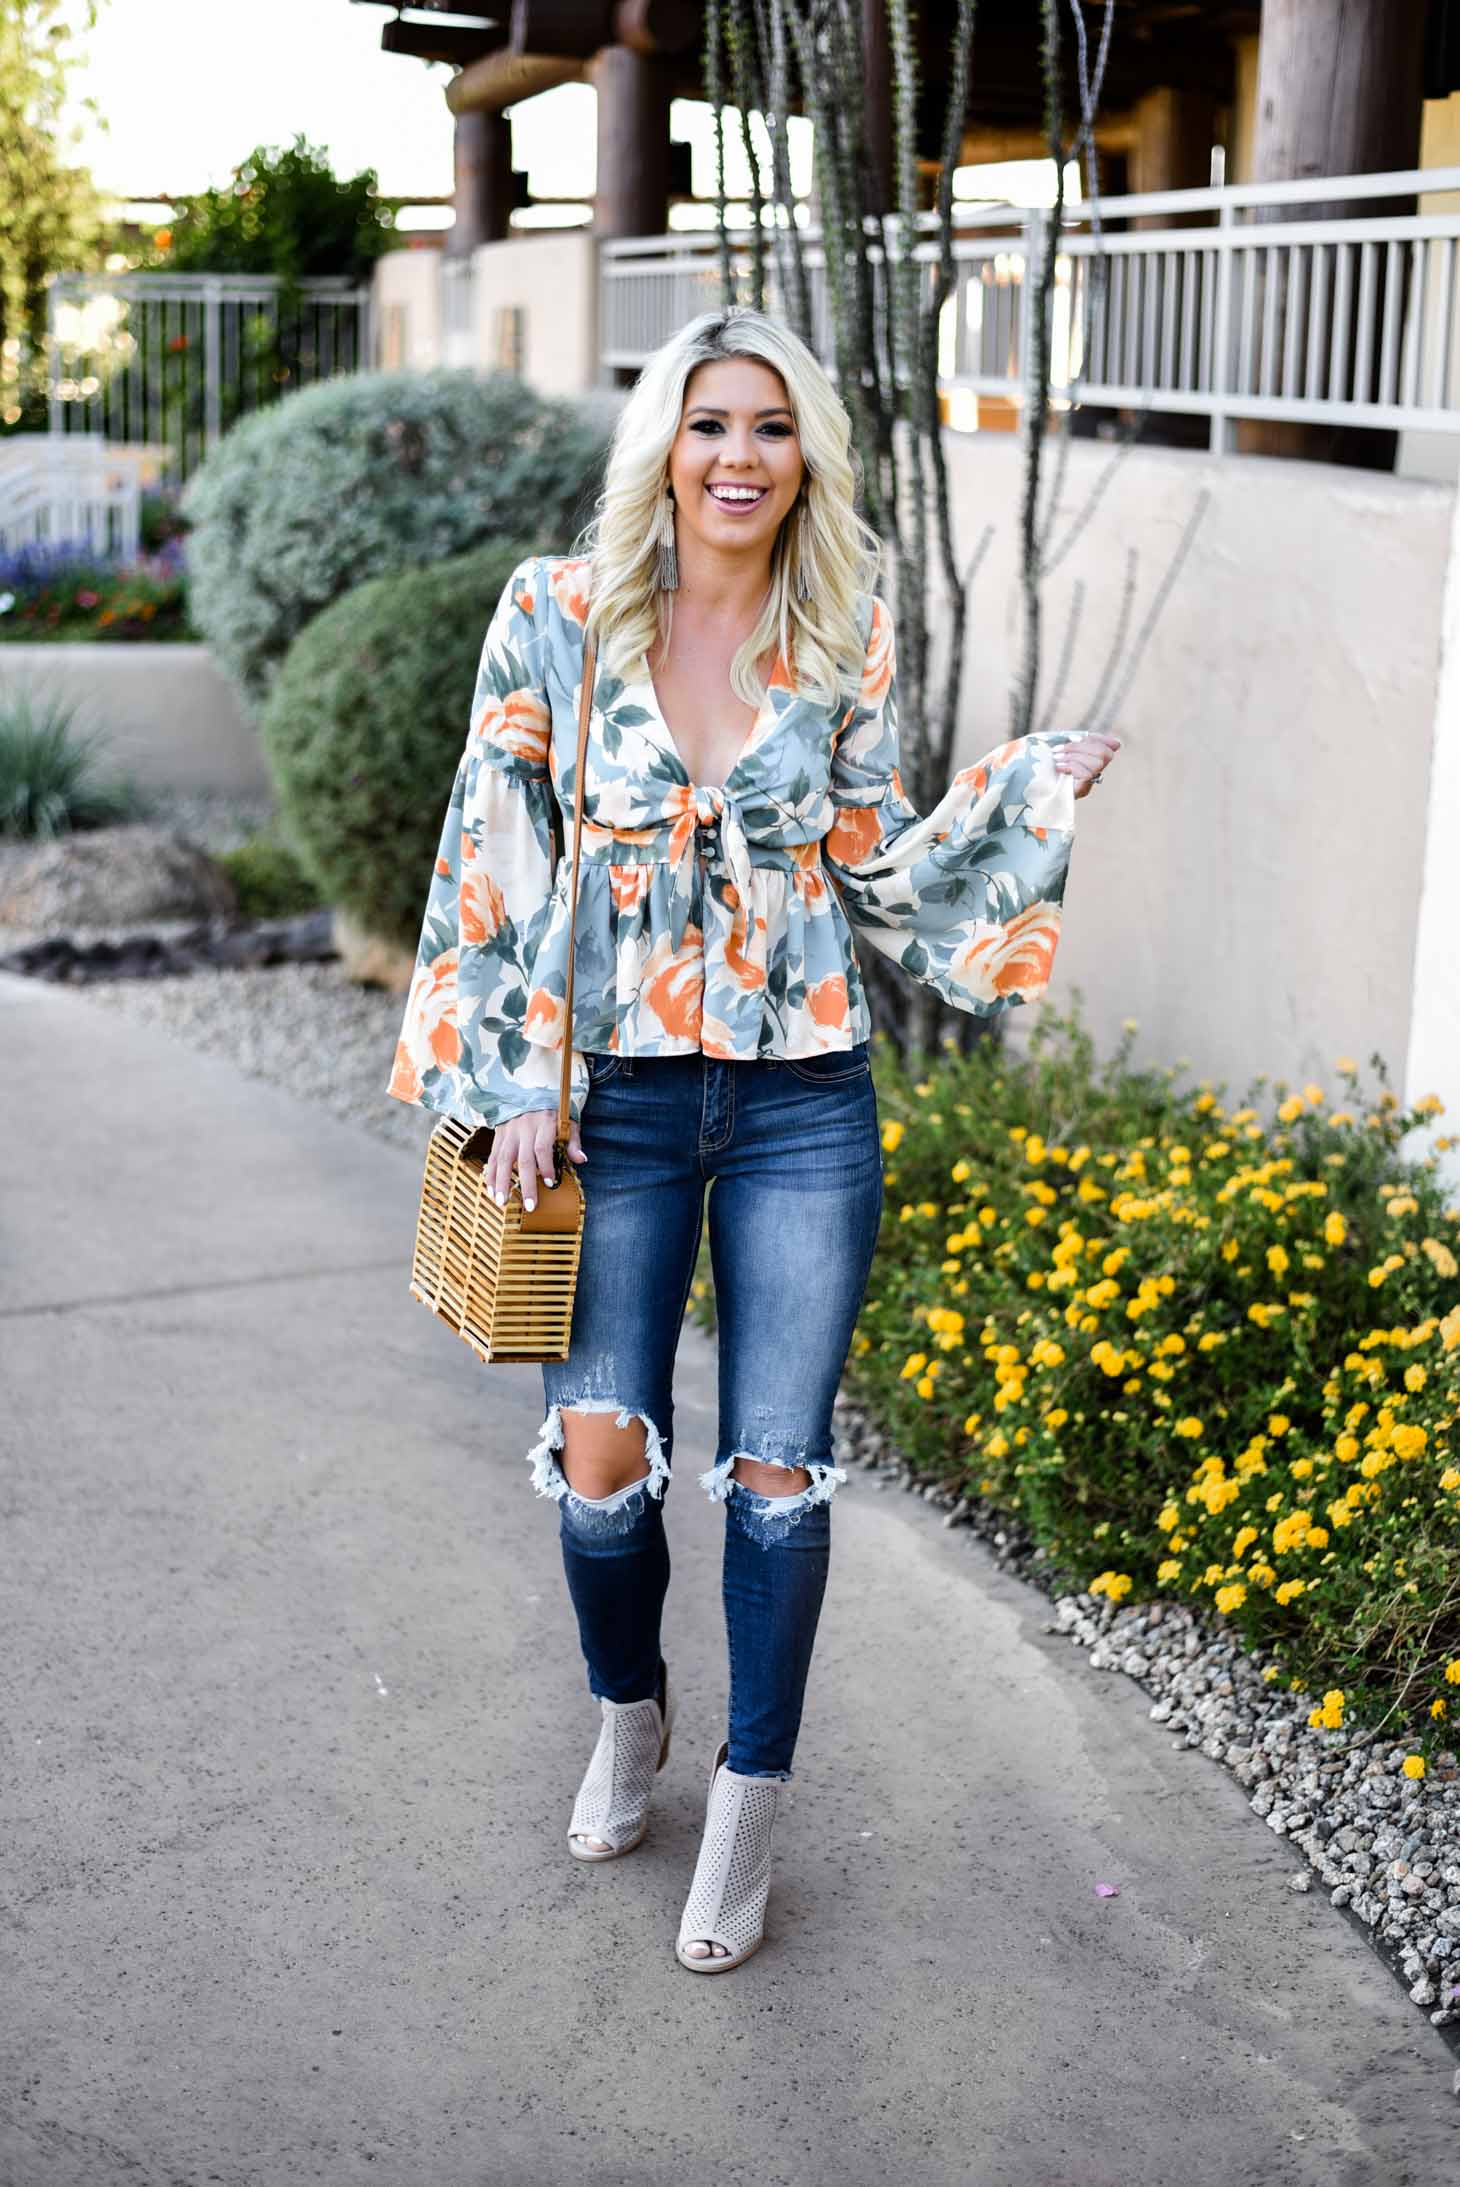 Erin Elizabeth of Wink and a Twirl in this Vici Dolls Jeans and Summer Floral Top